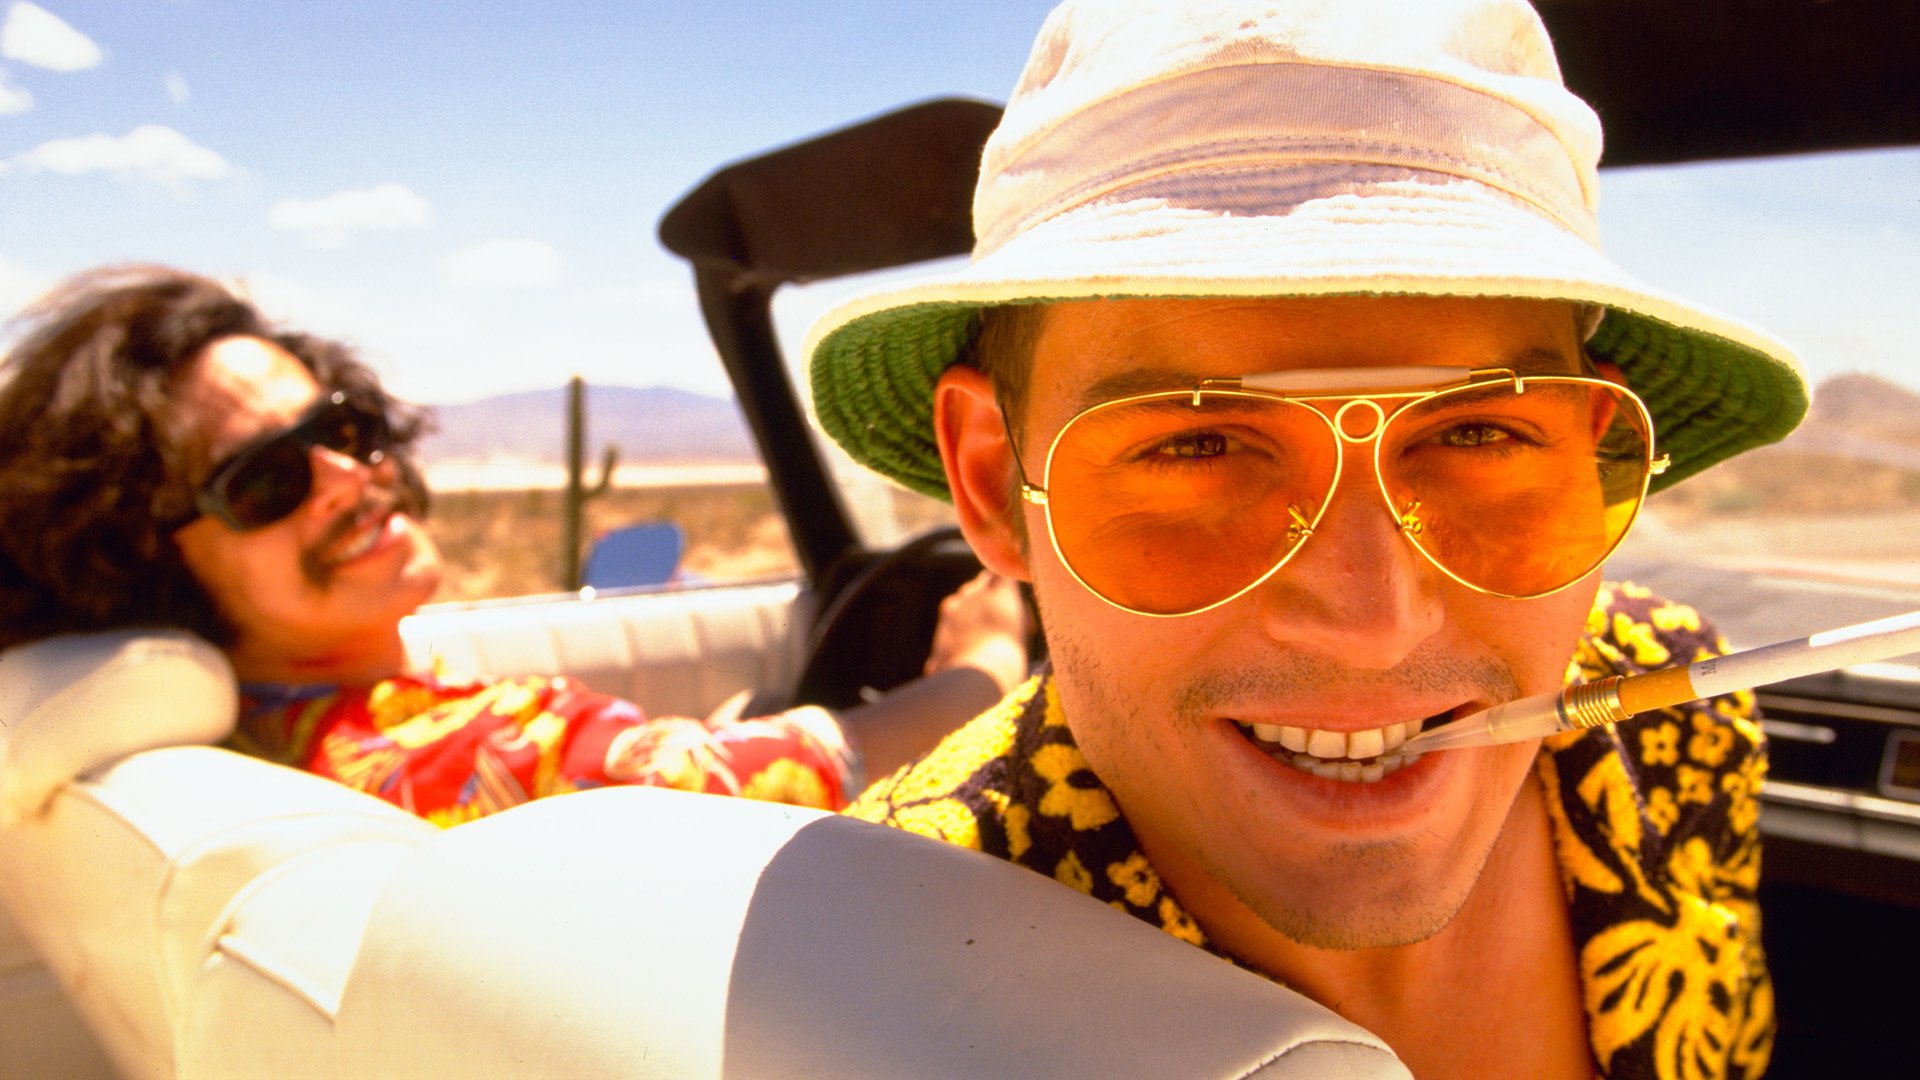 Why Fear and Loathing is a Cult Classic